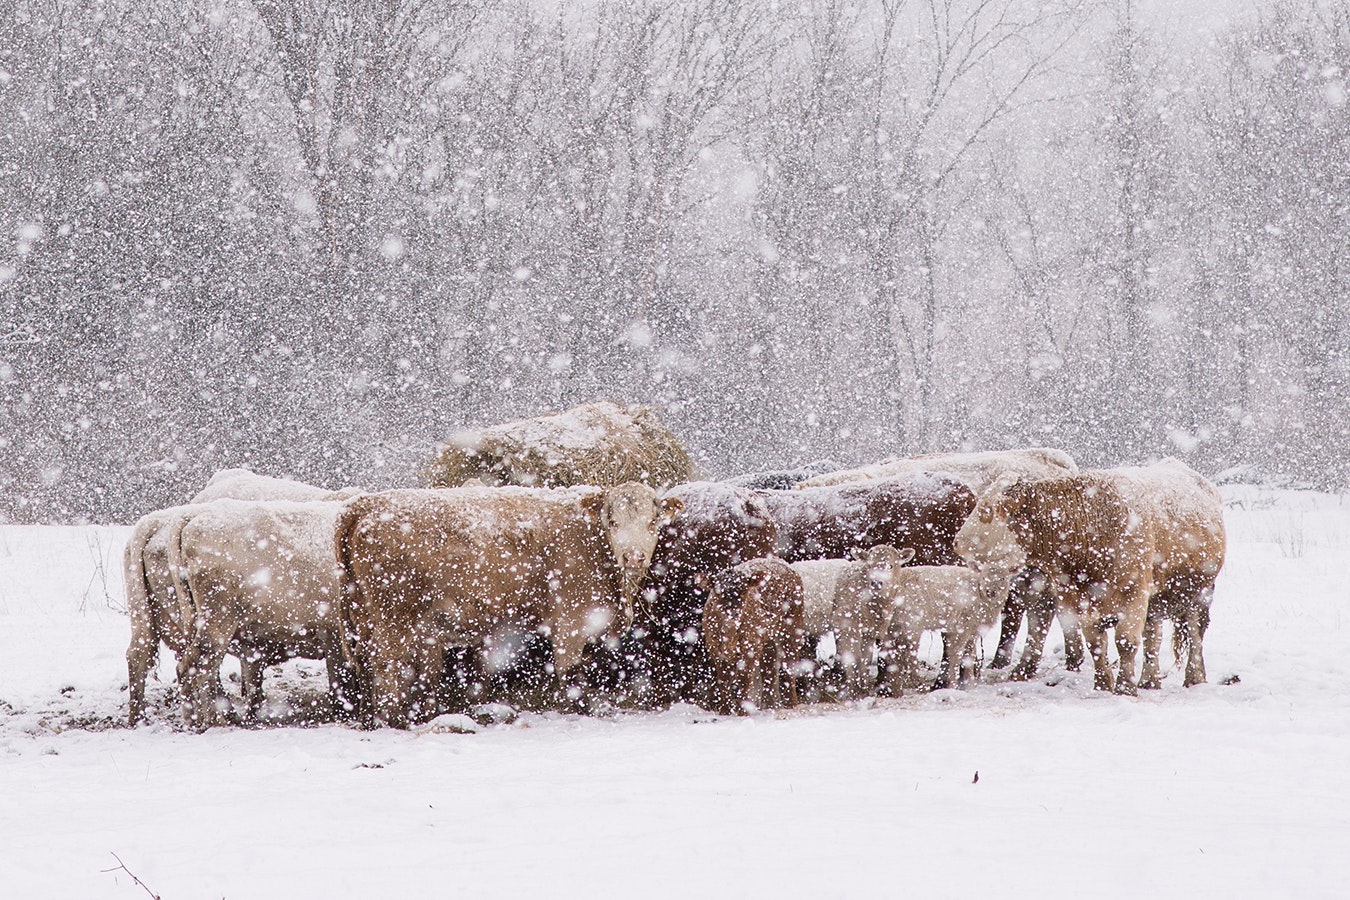 Cows in a blizzard 12 14 23